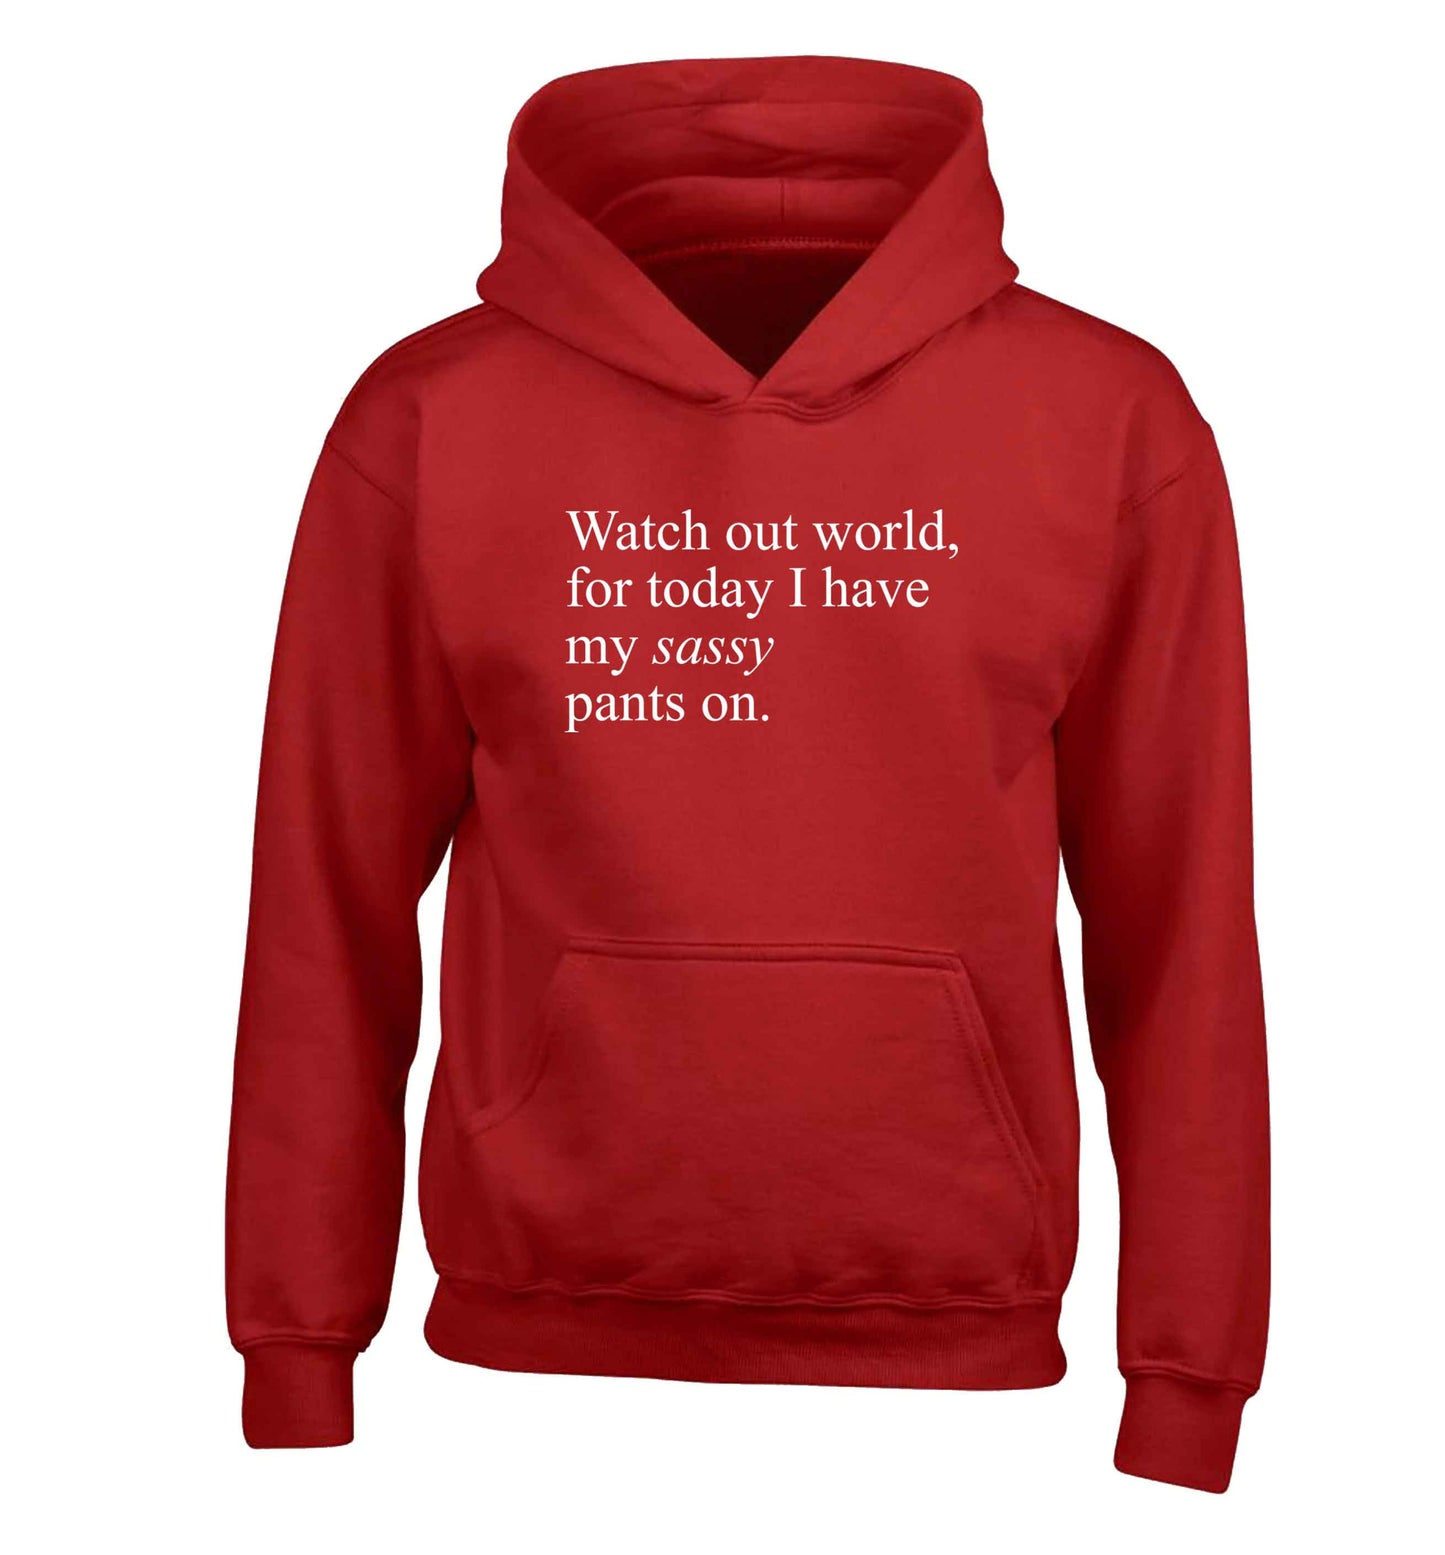 Watch out world for today I have my sassy pants on children's red hoodie 12-13 Years